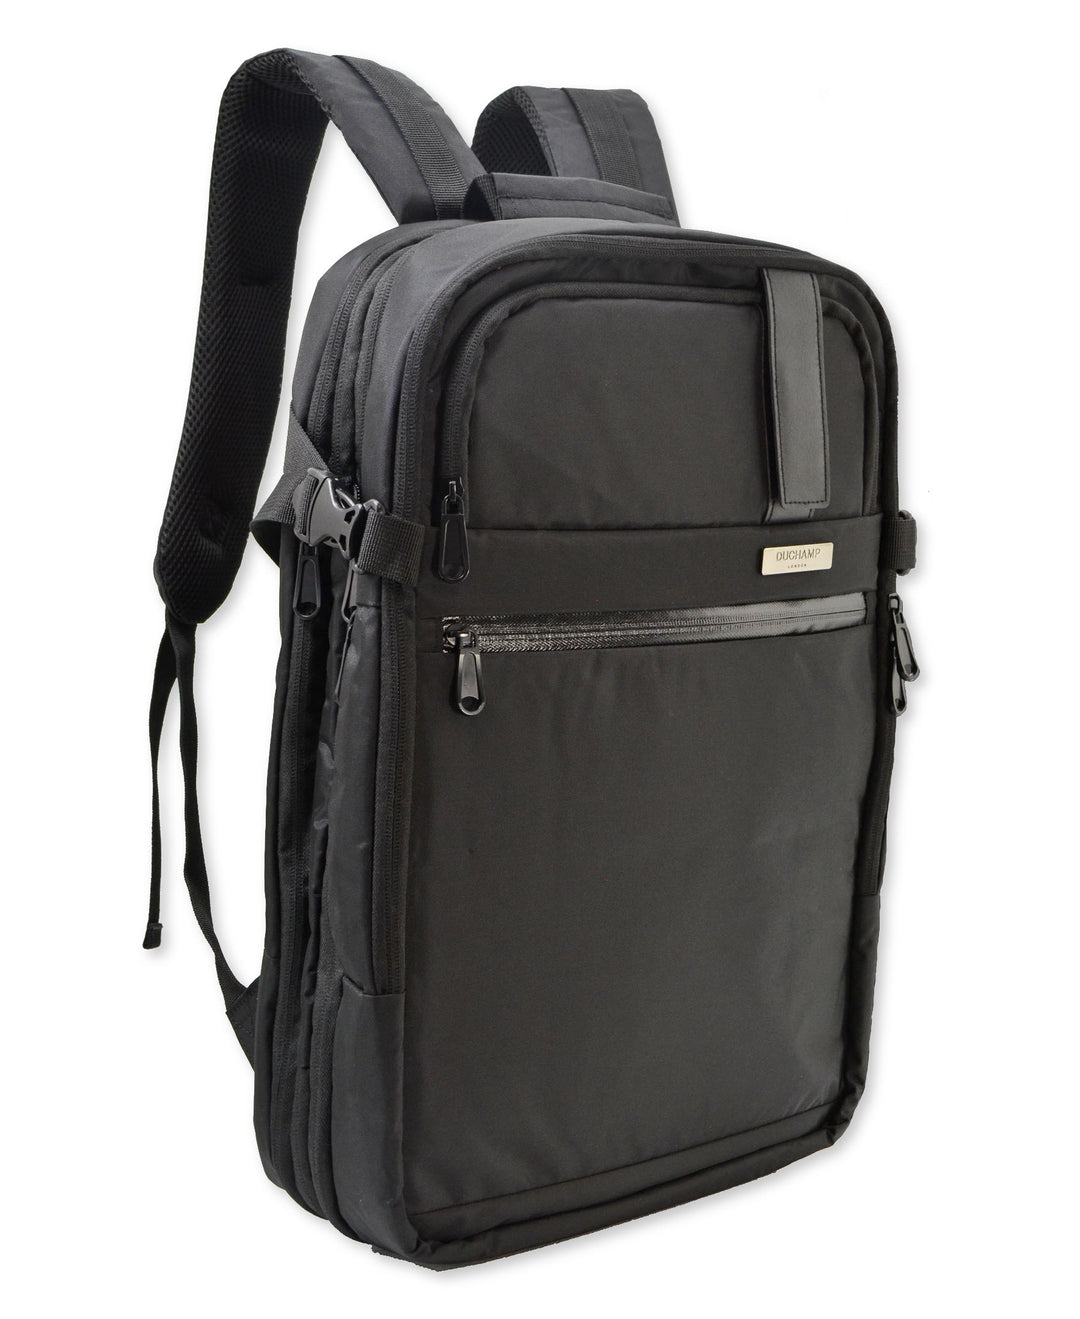 Getaway Expandable Carry-On Backpack Suitcase by Duchamp